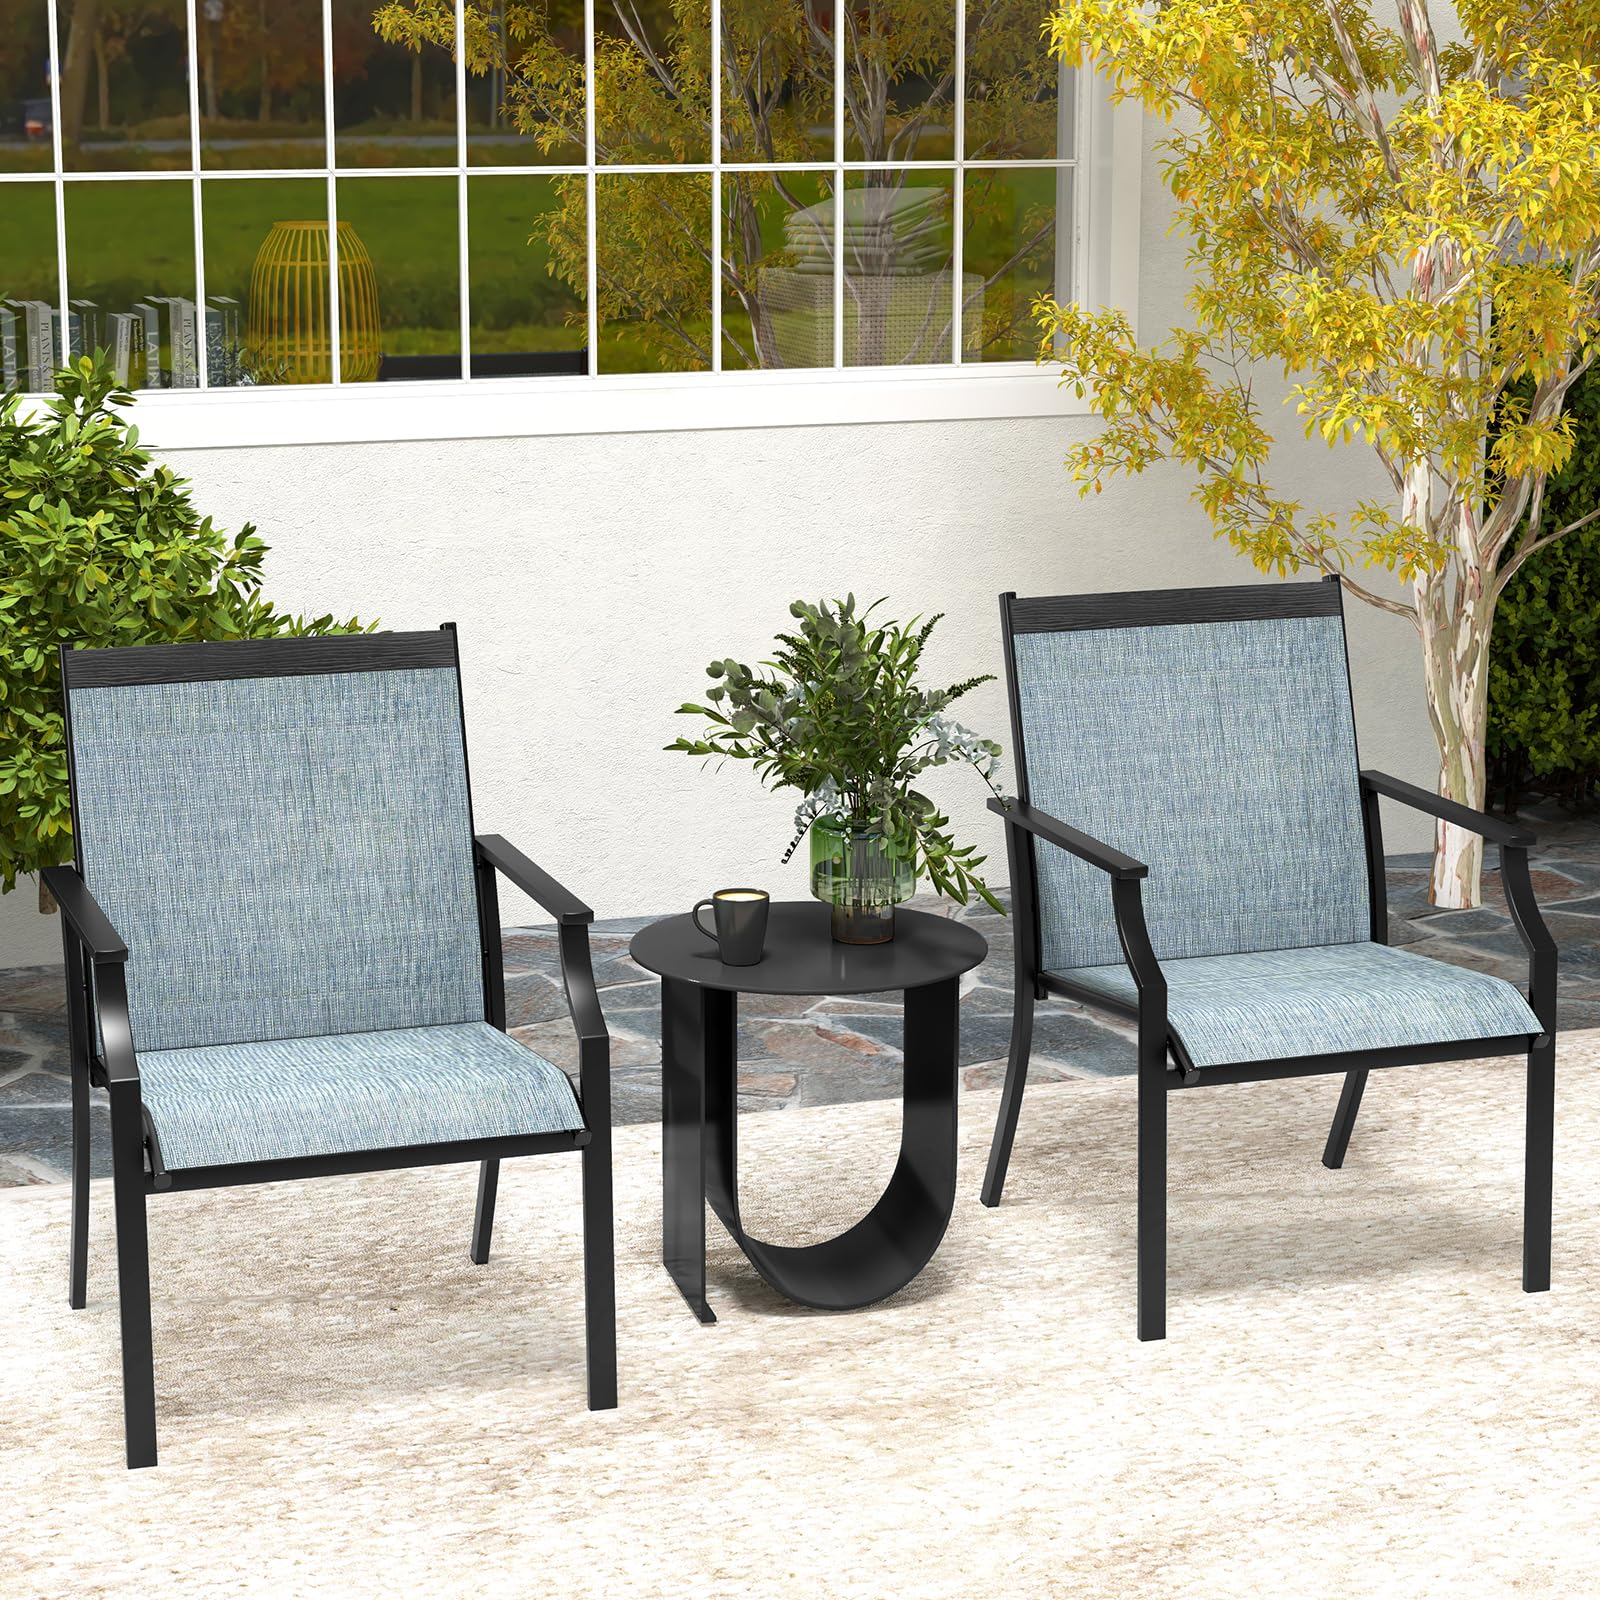 Giantex Patio Chairs Set of 2, All Weather Resistant Outdoor Chairs for Front Porch Lawn Garden Yard